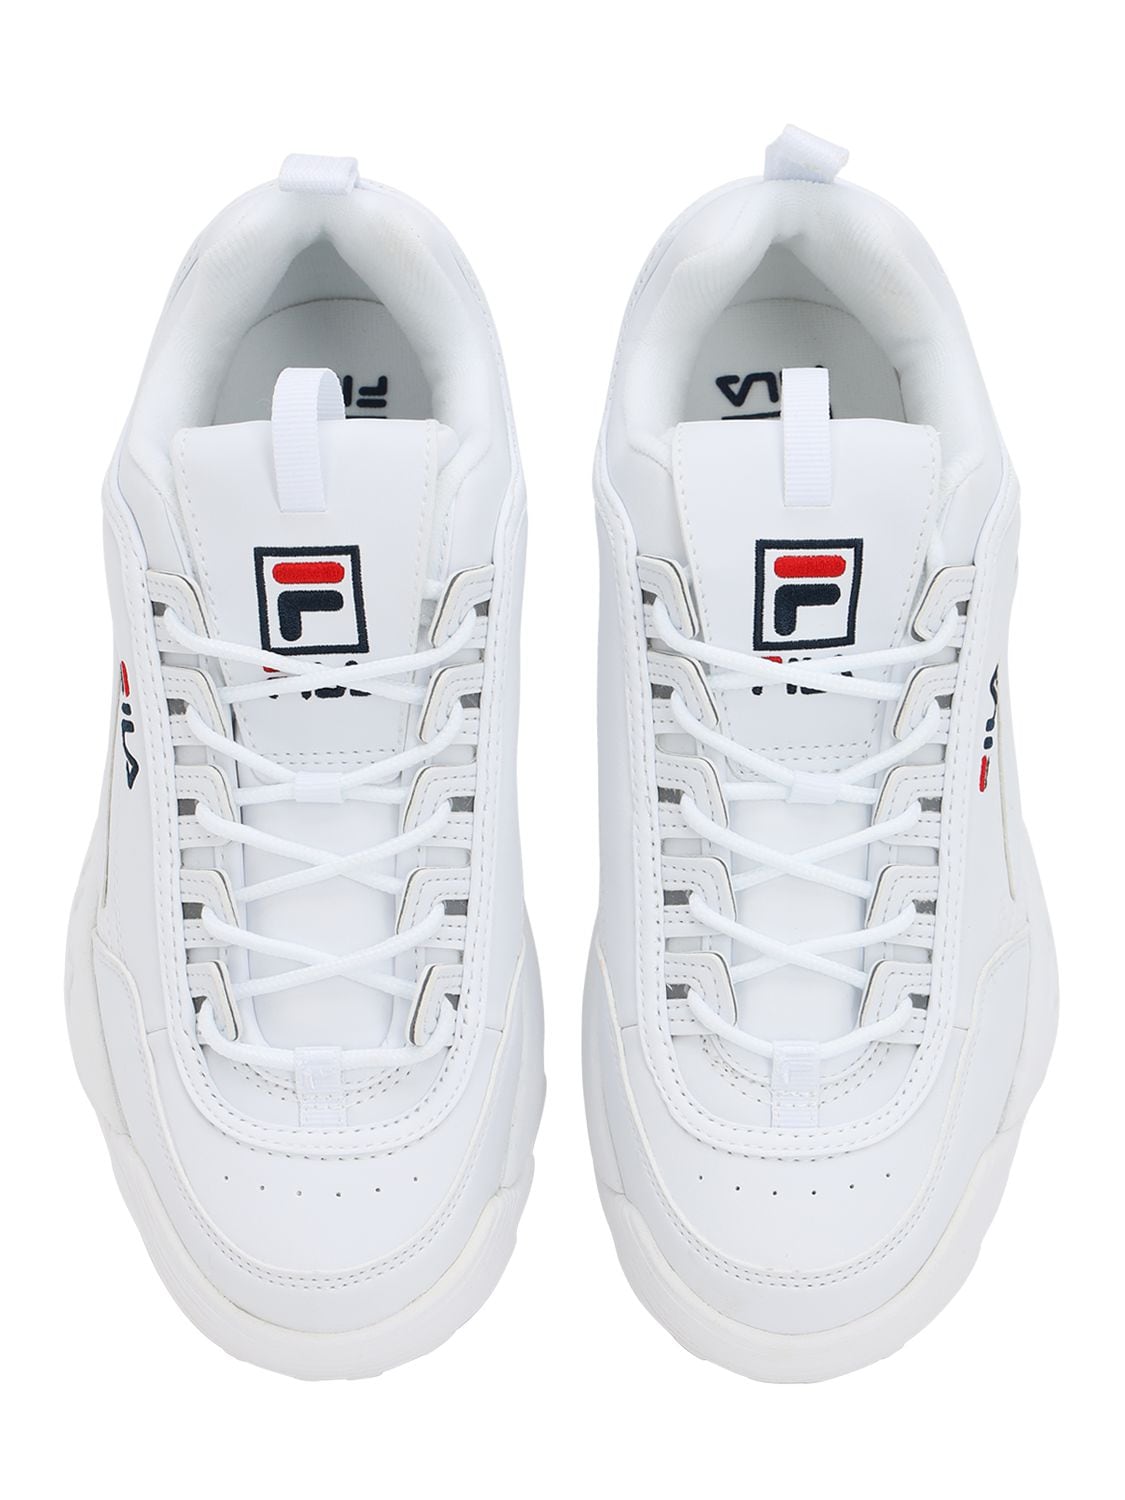 Fila Low-top Trainers In White/navy/red | ModeSens